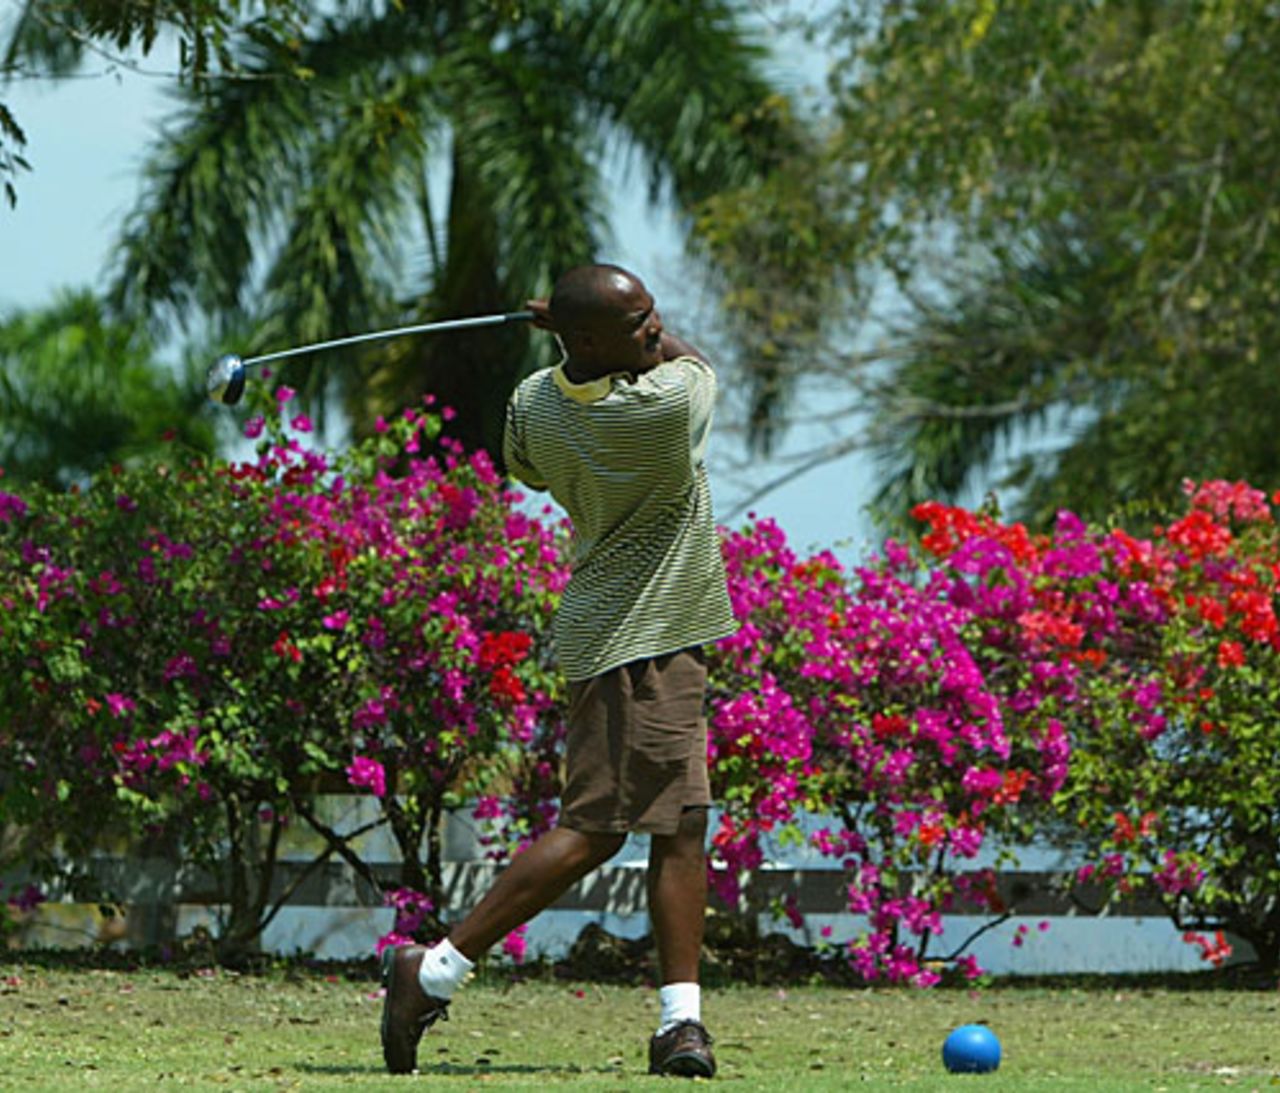 Brian Lara relaxes with a round of golf, Kingston, Jamaica, March 8, 2004